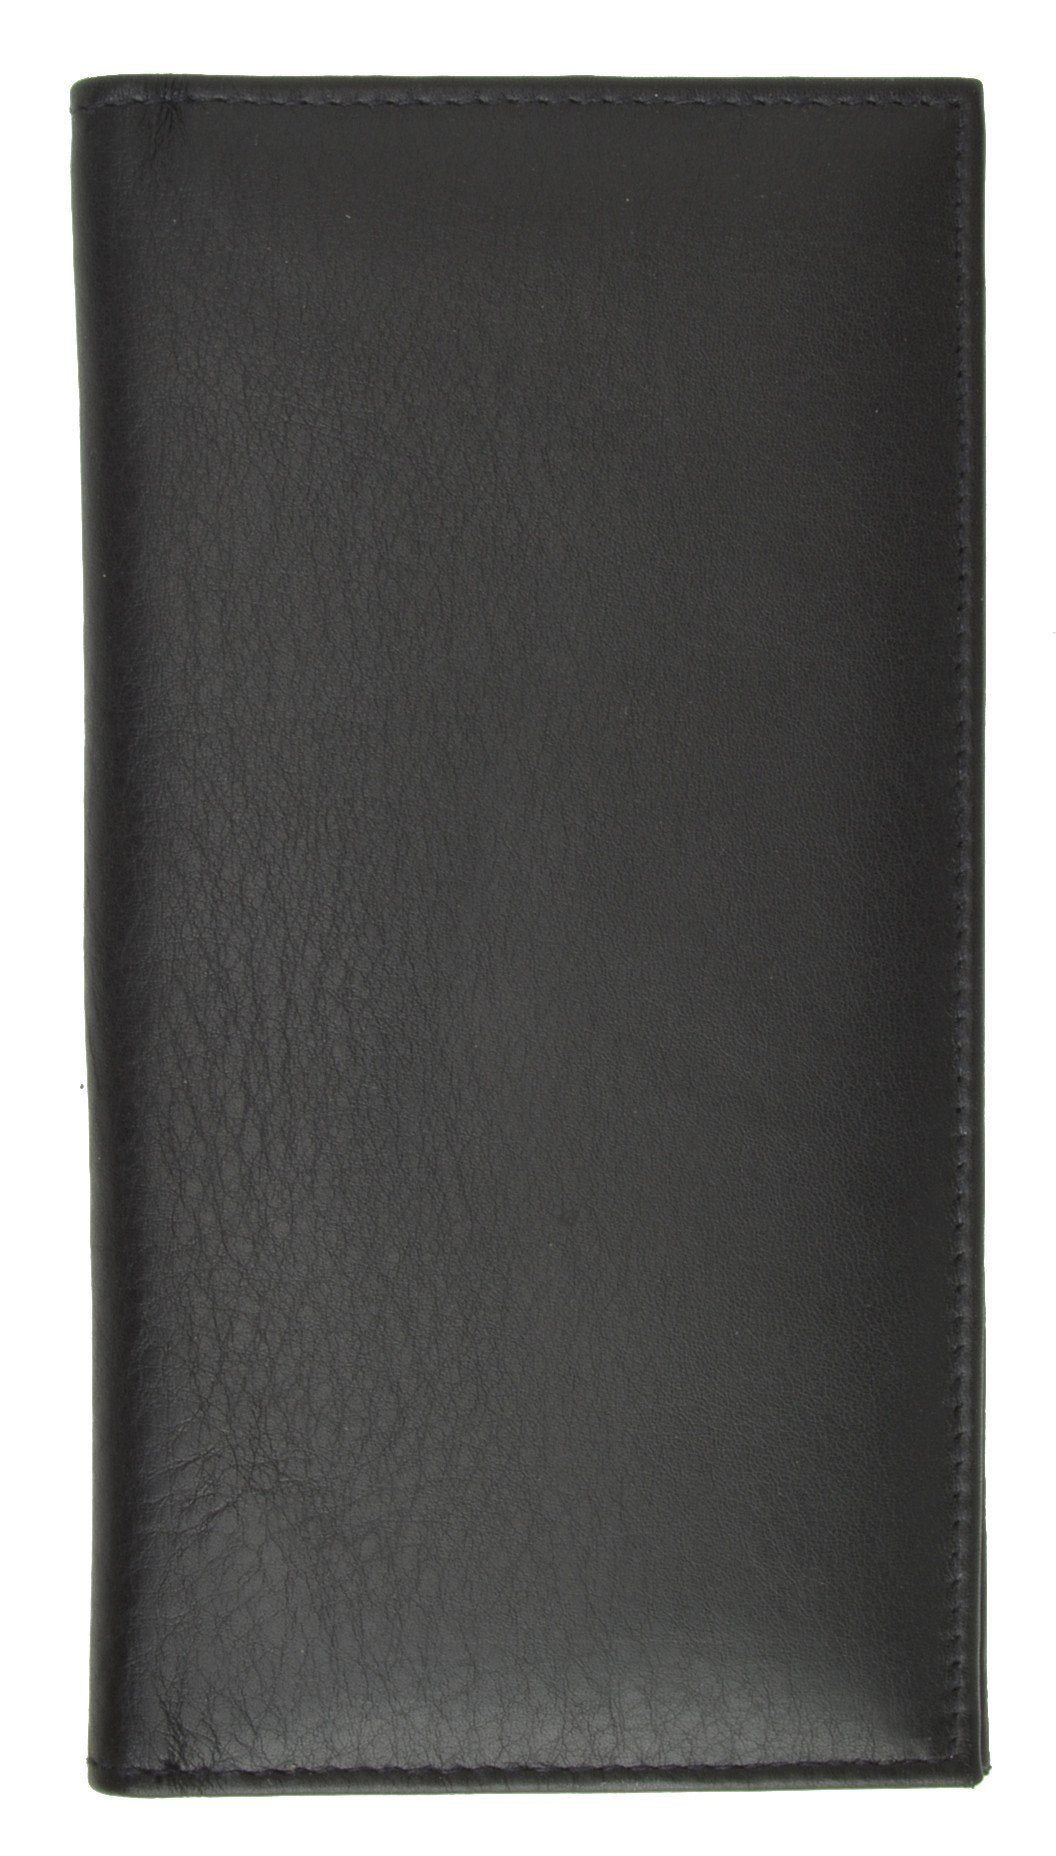 Unisex High Quality Checkbook Size Leather Wallet - Assorted Colors